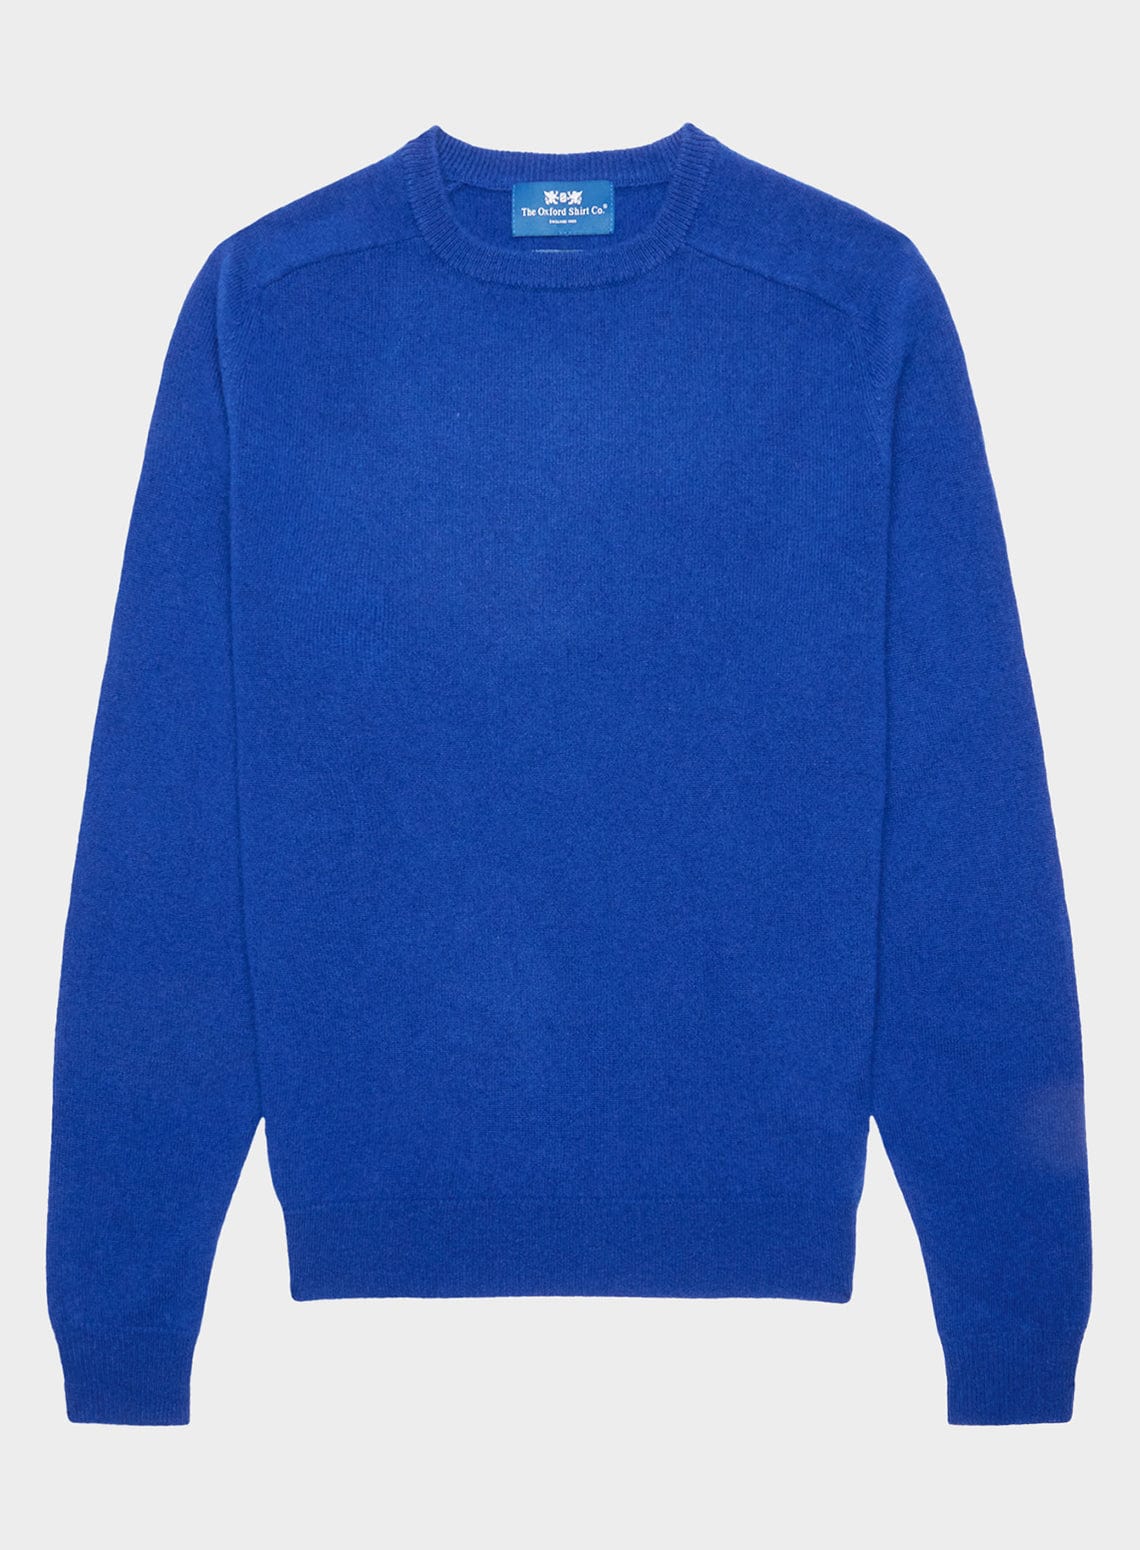 Mens Cashmere Crew Neck Jumper in Ultra Blue - Oxford Shirt Co.